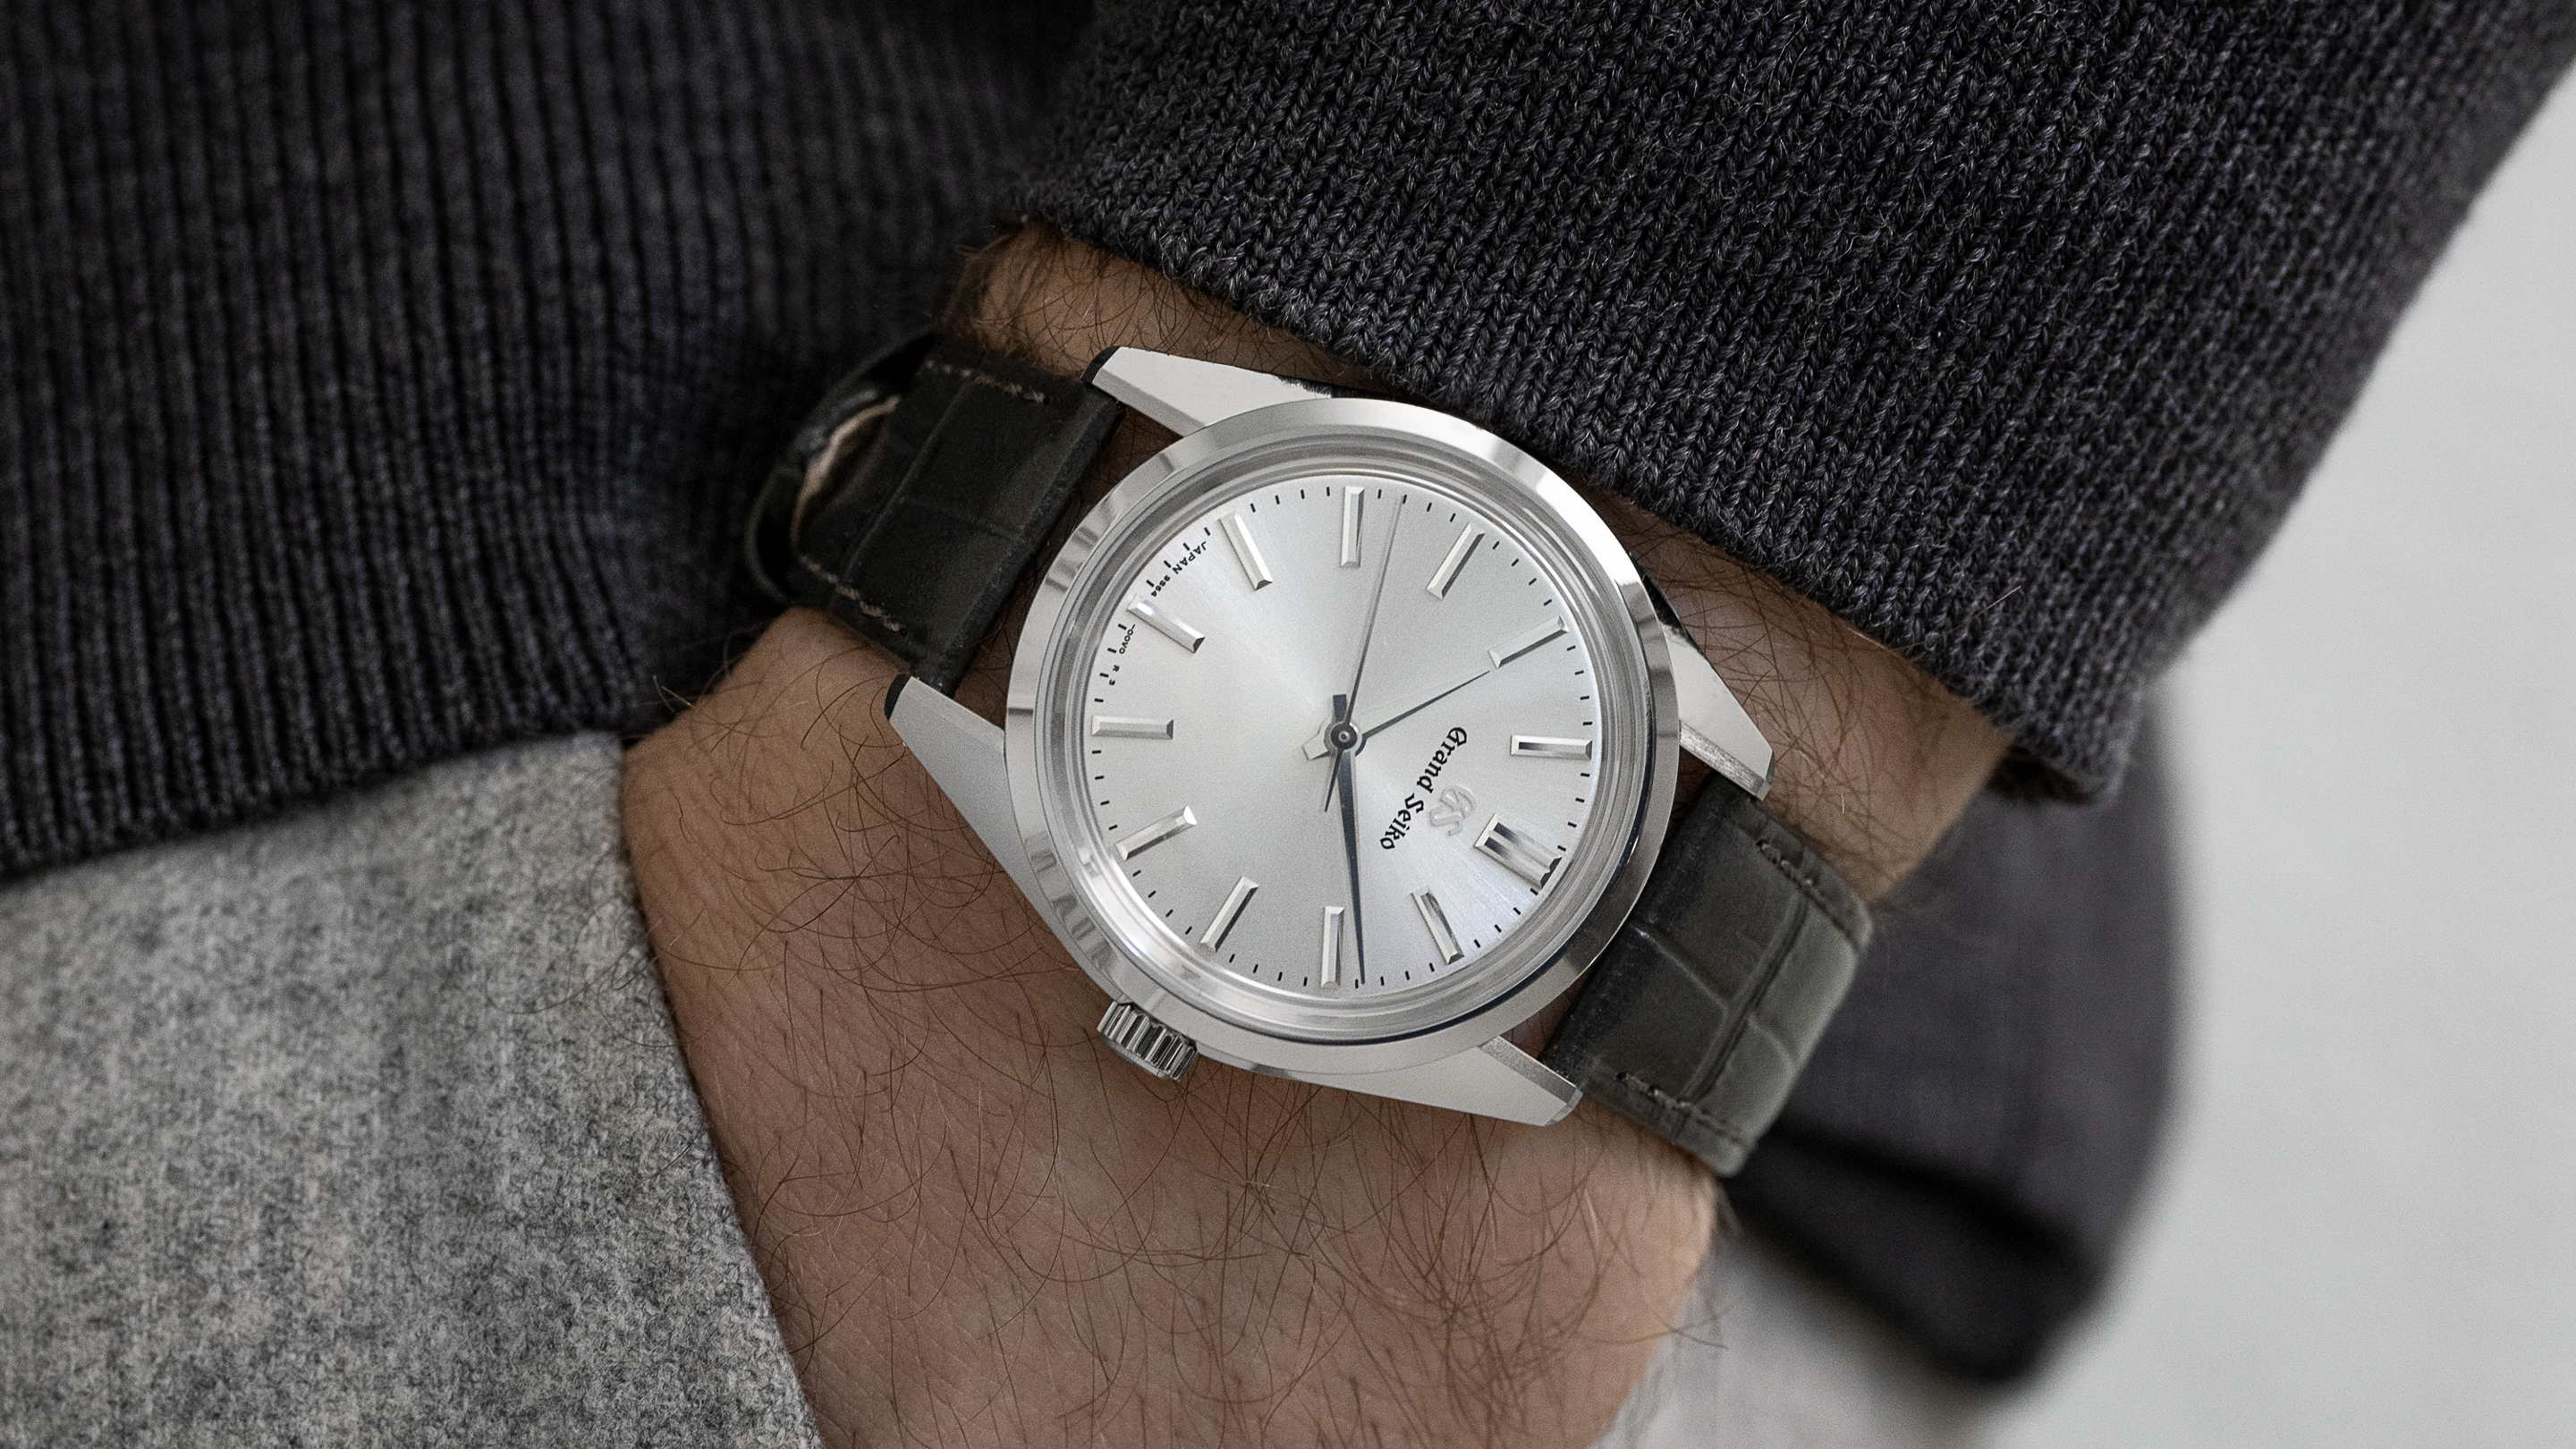 Grand Seiko's New 36.5mm Watch Is A Game-Changer